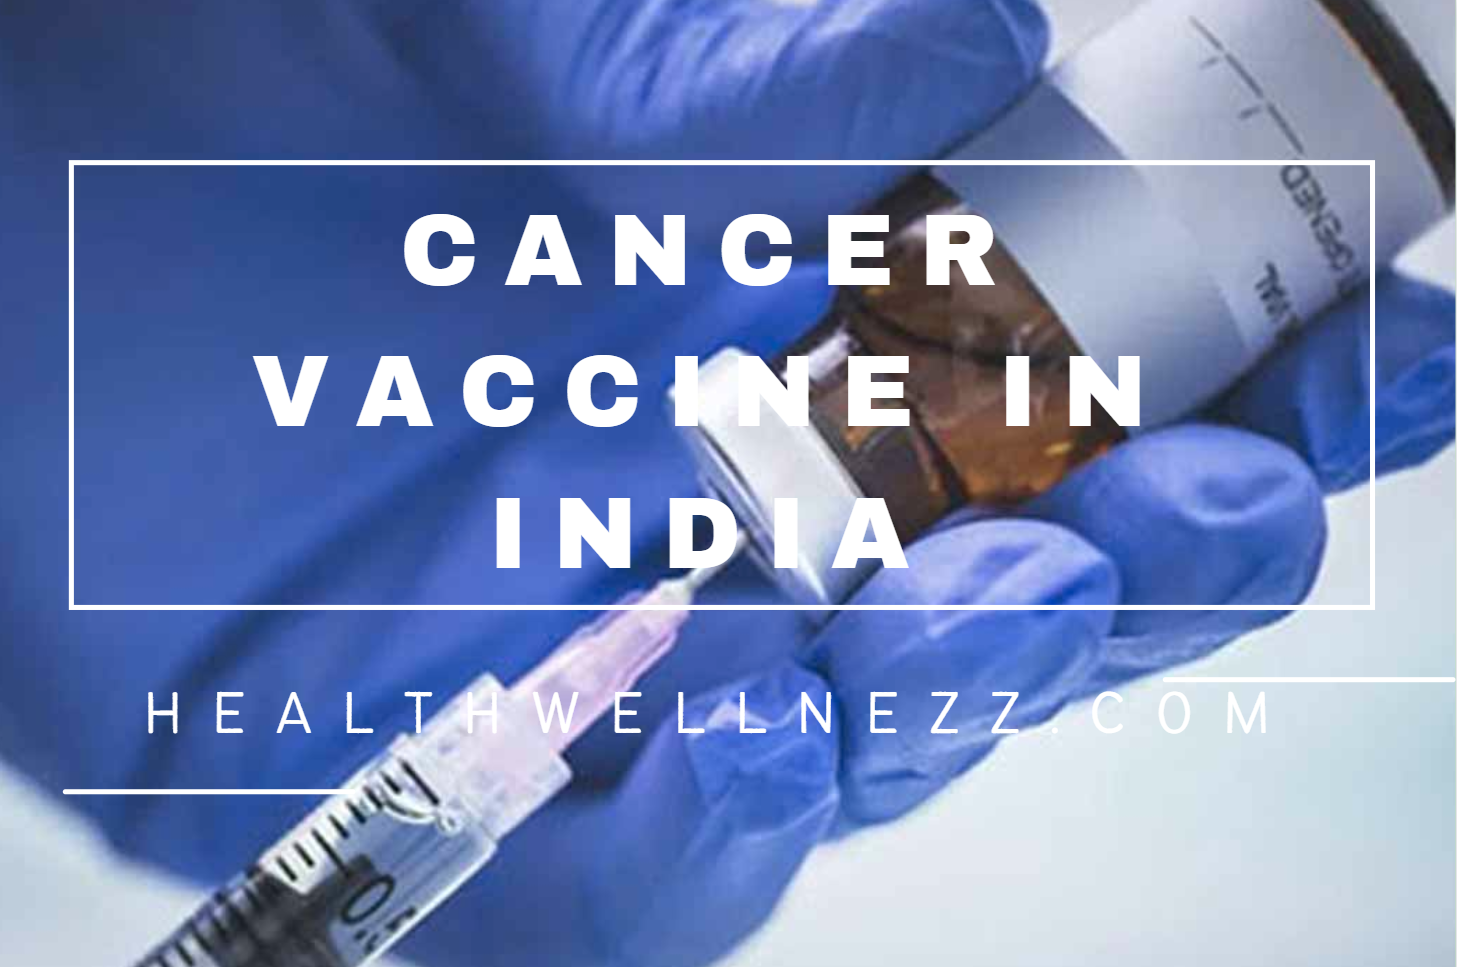 Cancer vaccine in India